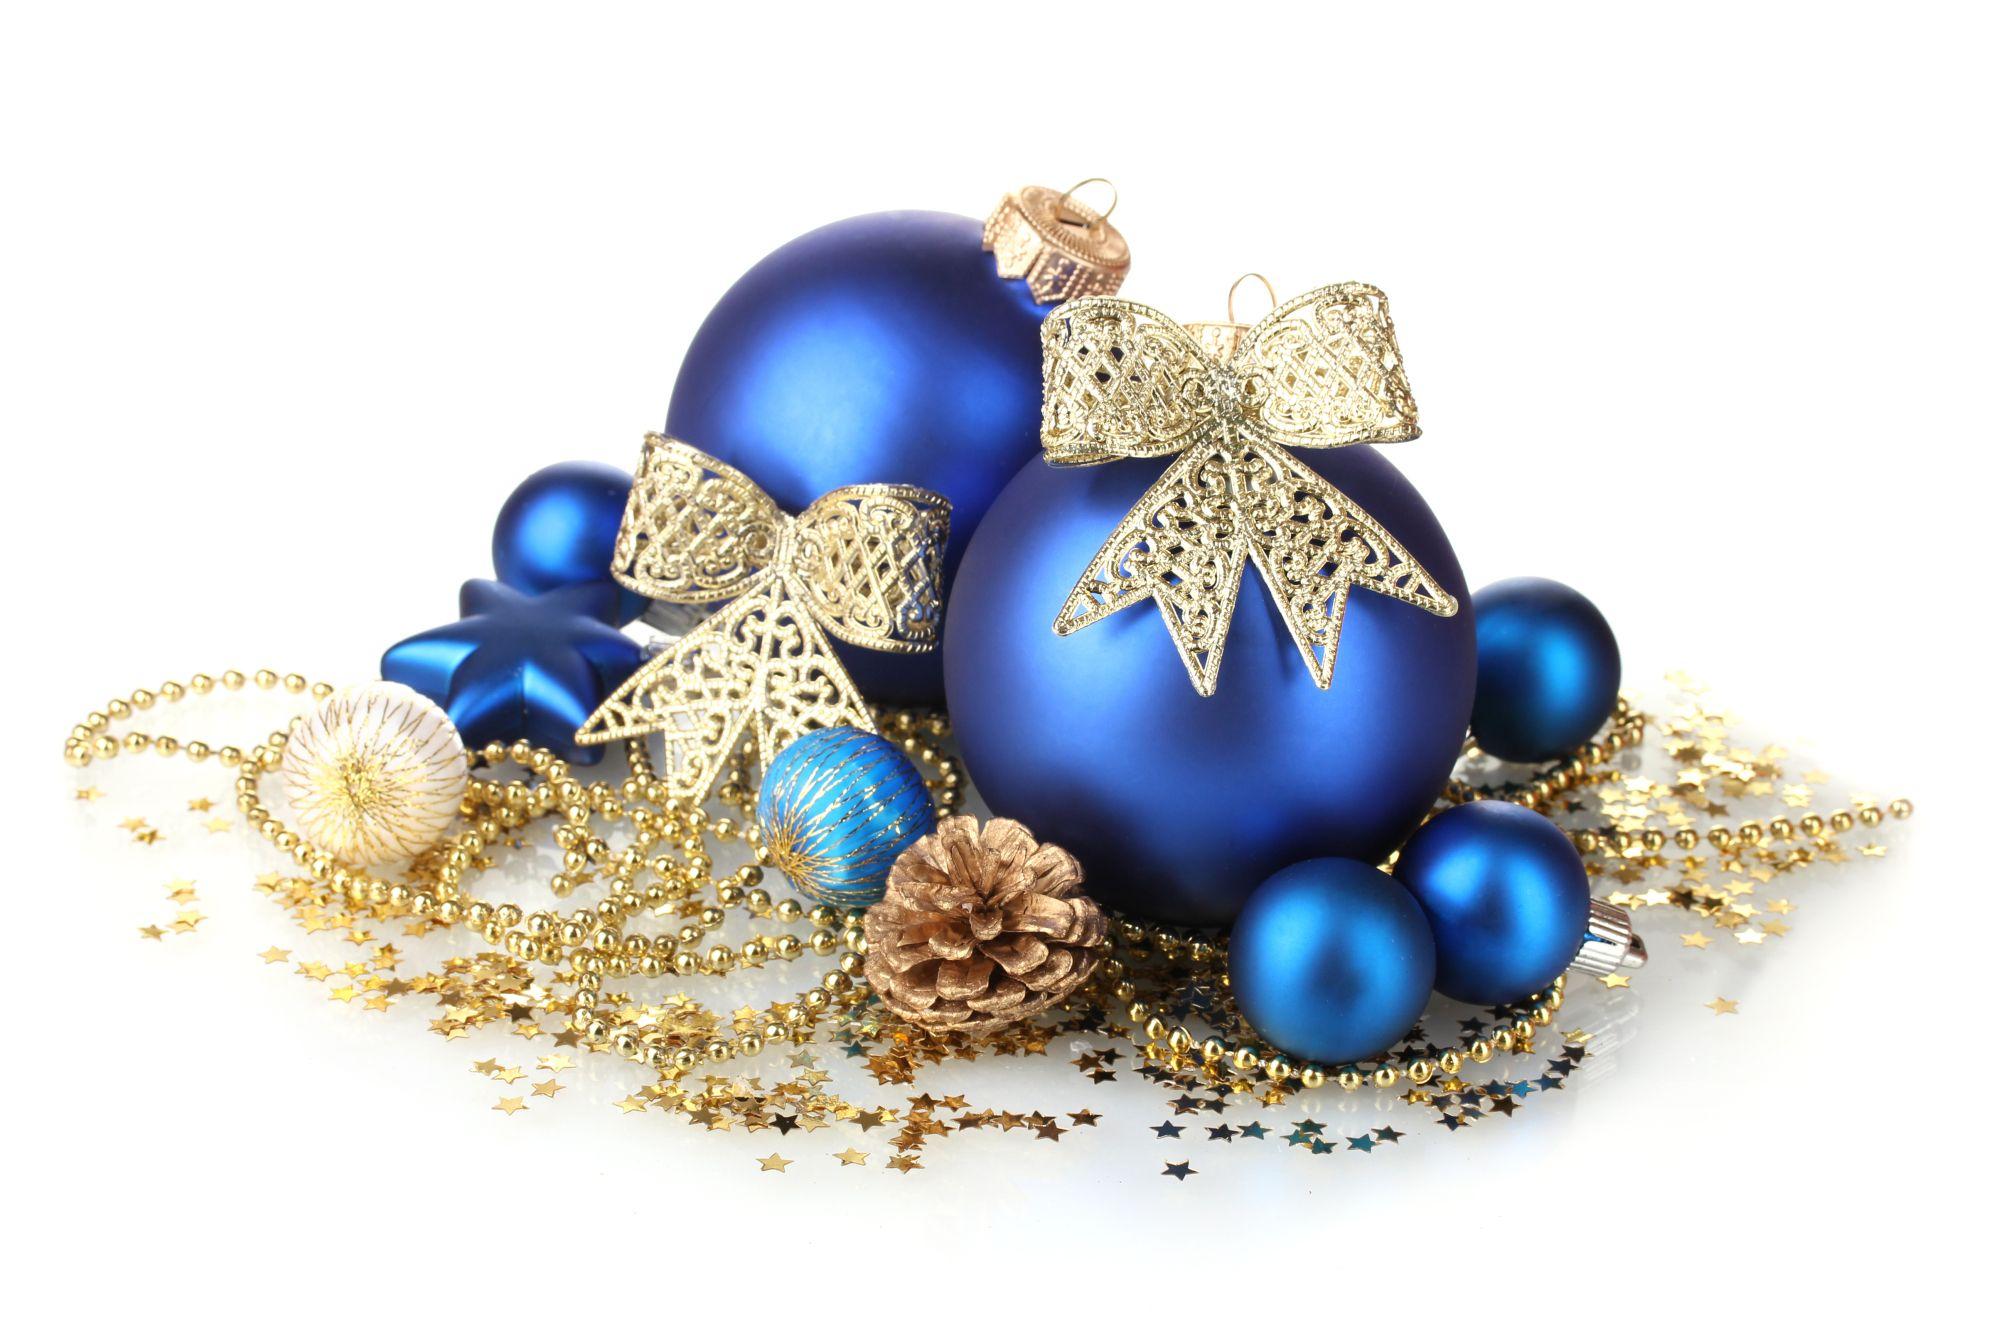 Blue and Gold Holiday Ornaments widescreen wallpaper. Wide